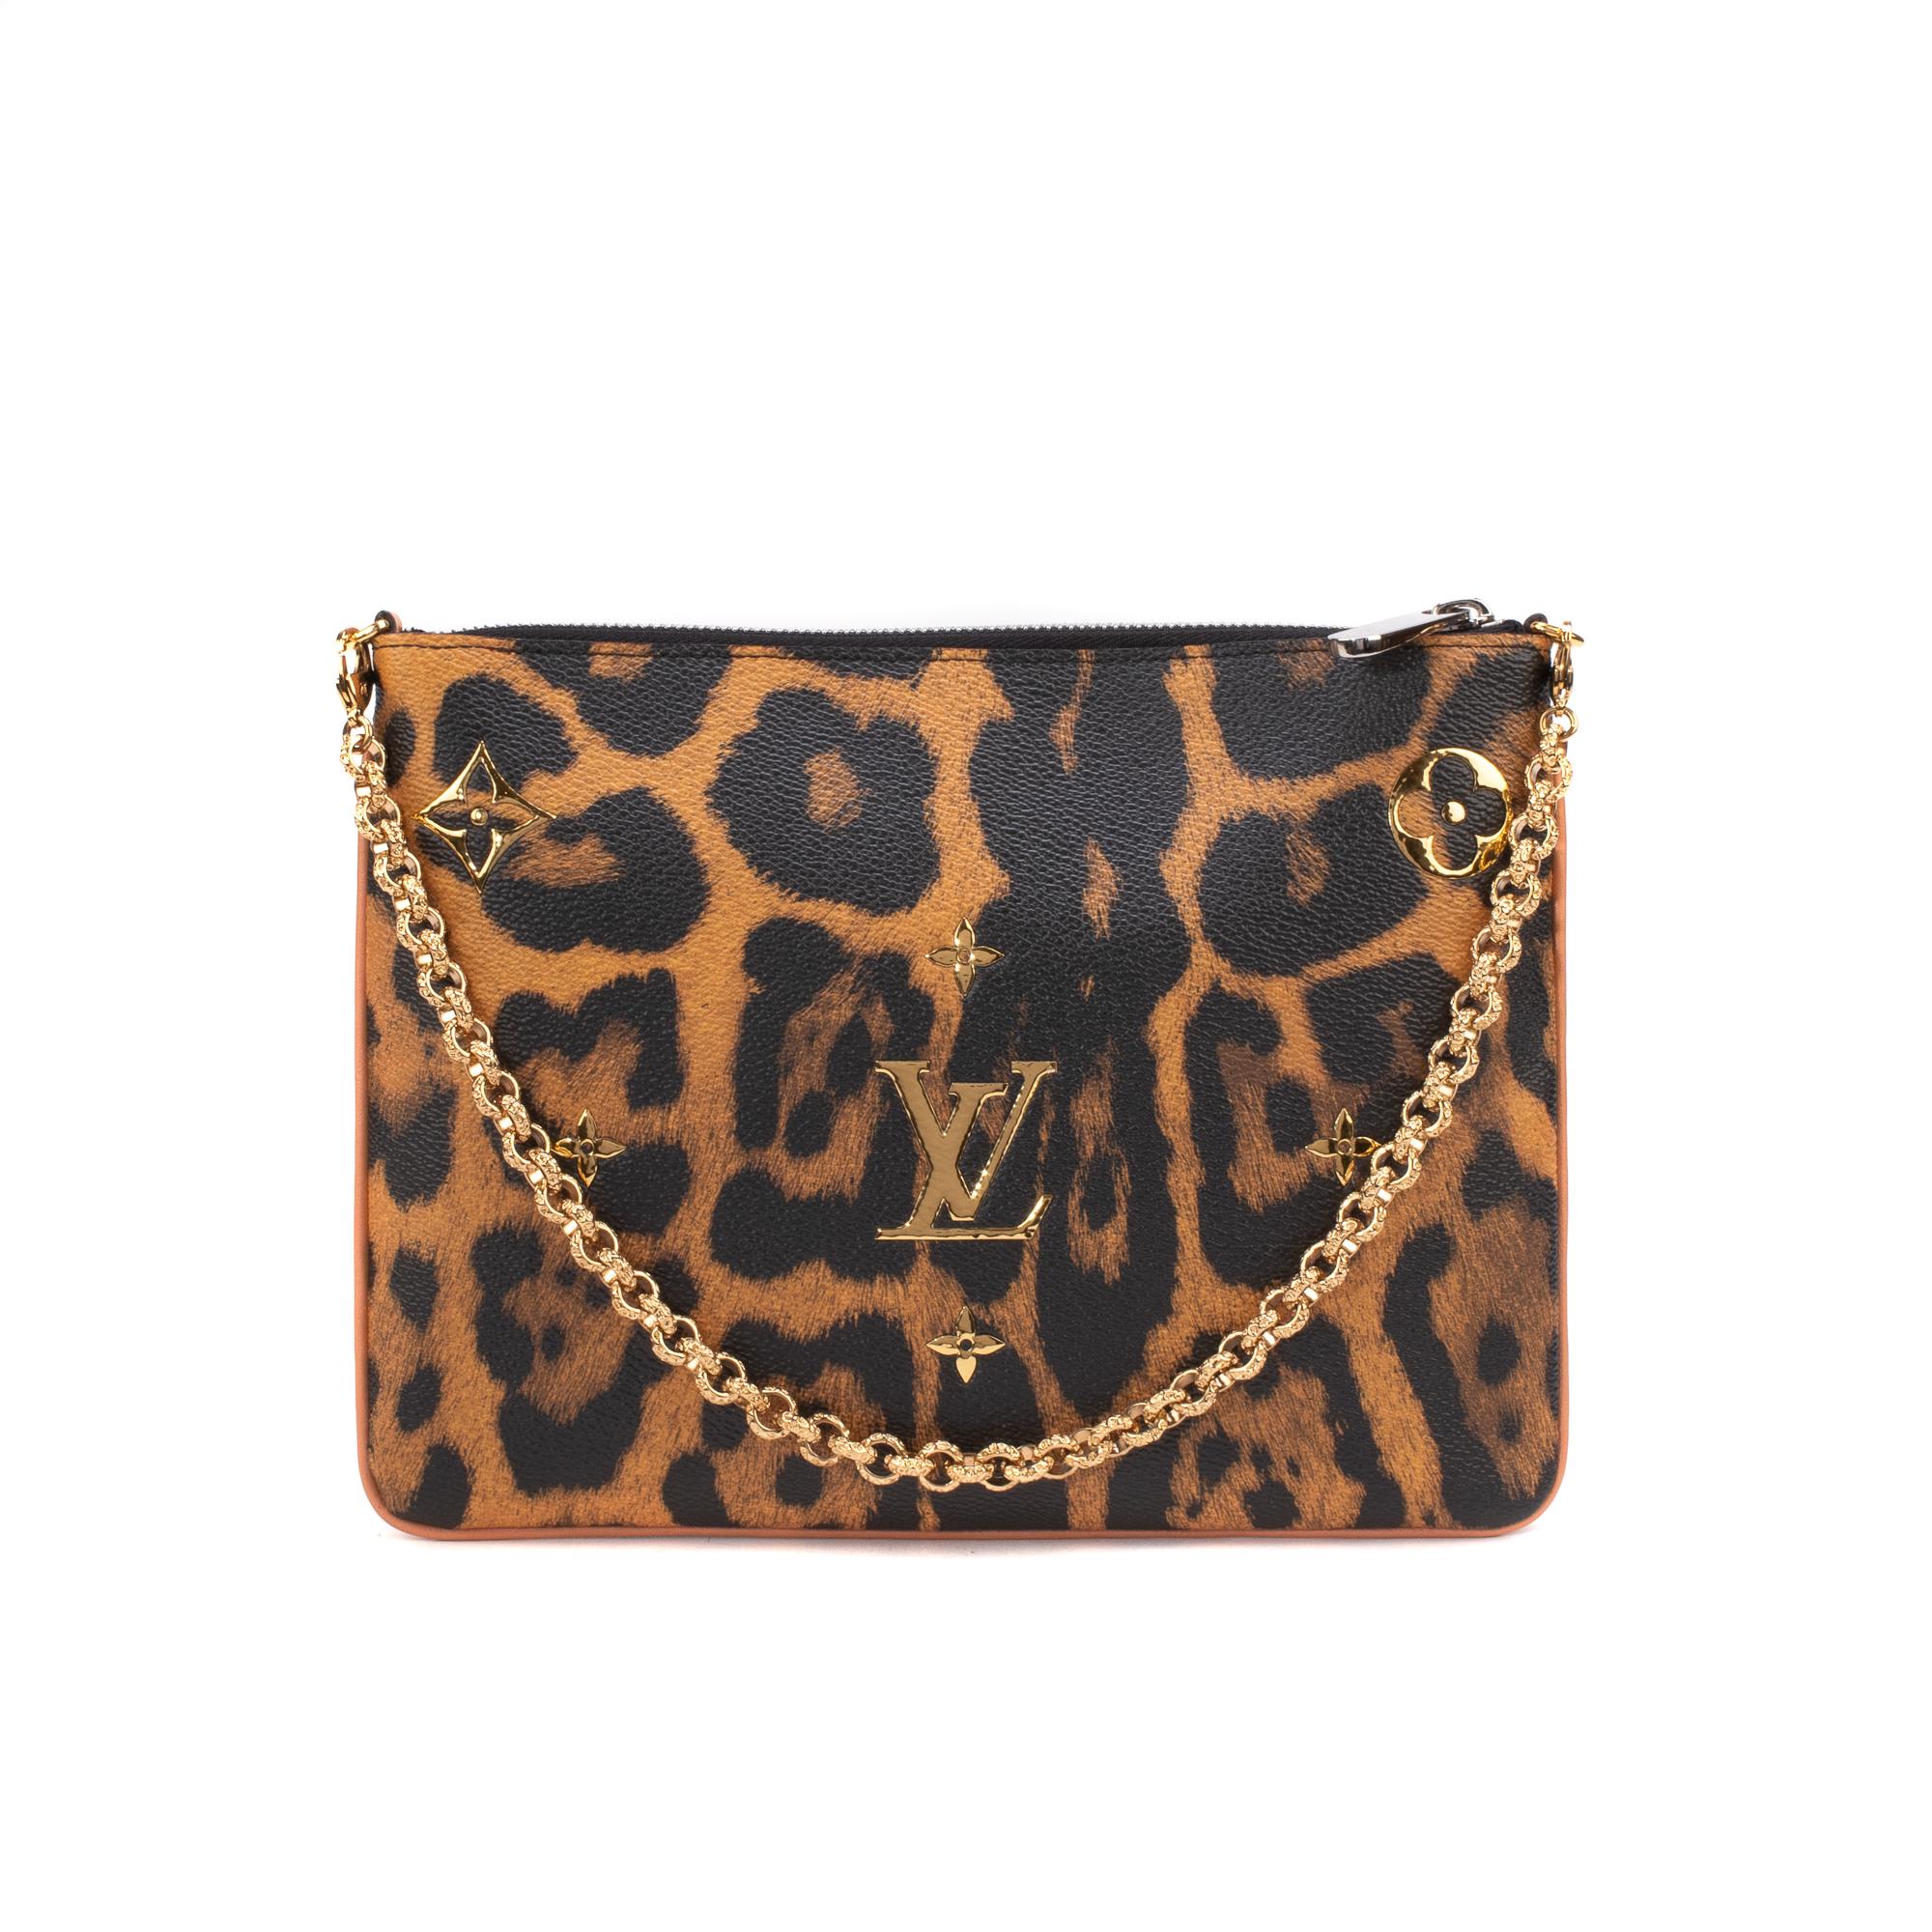 Superb Louis Vuitton pocket bag ultra-limited series designated by Jeff Koons and not found in stores. This elegant way of carrying the essentials brings to perfection the gold-studded Monogram, reflective metallic letters as well as the leopard